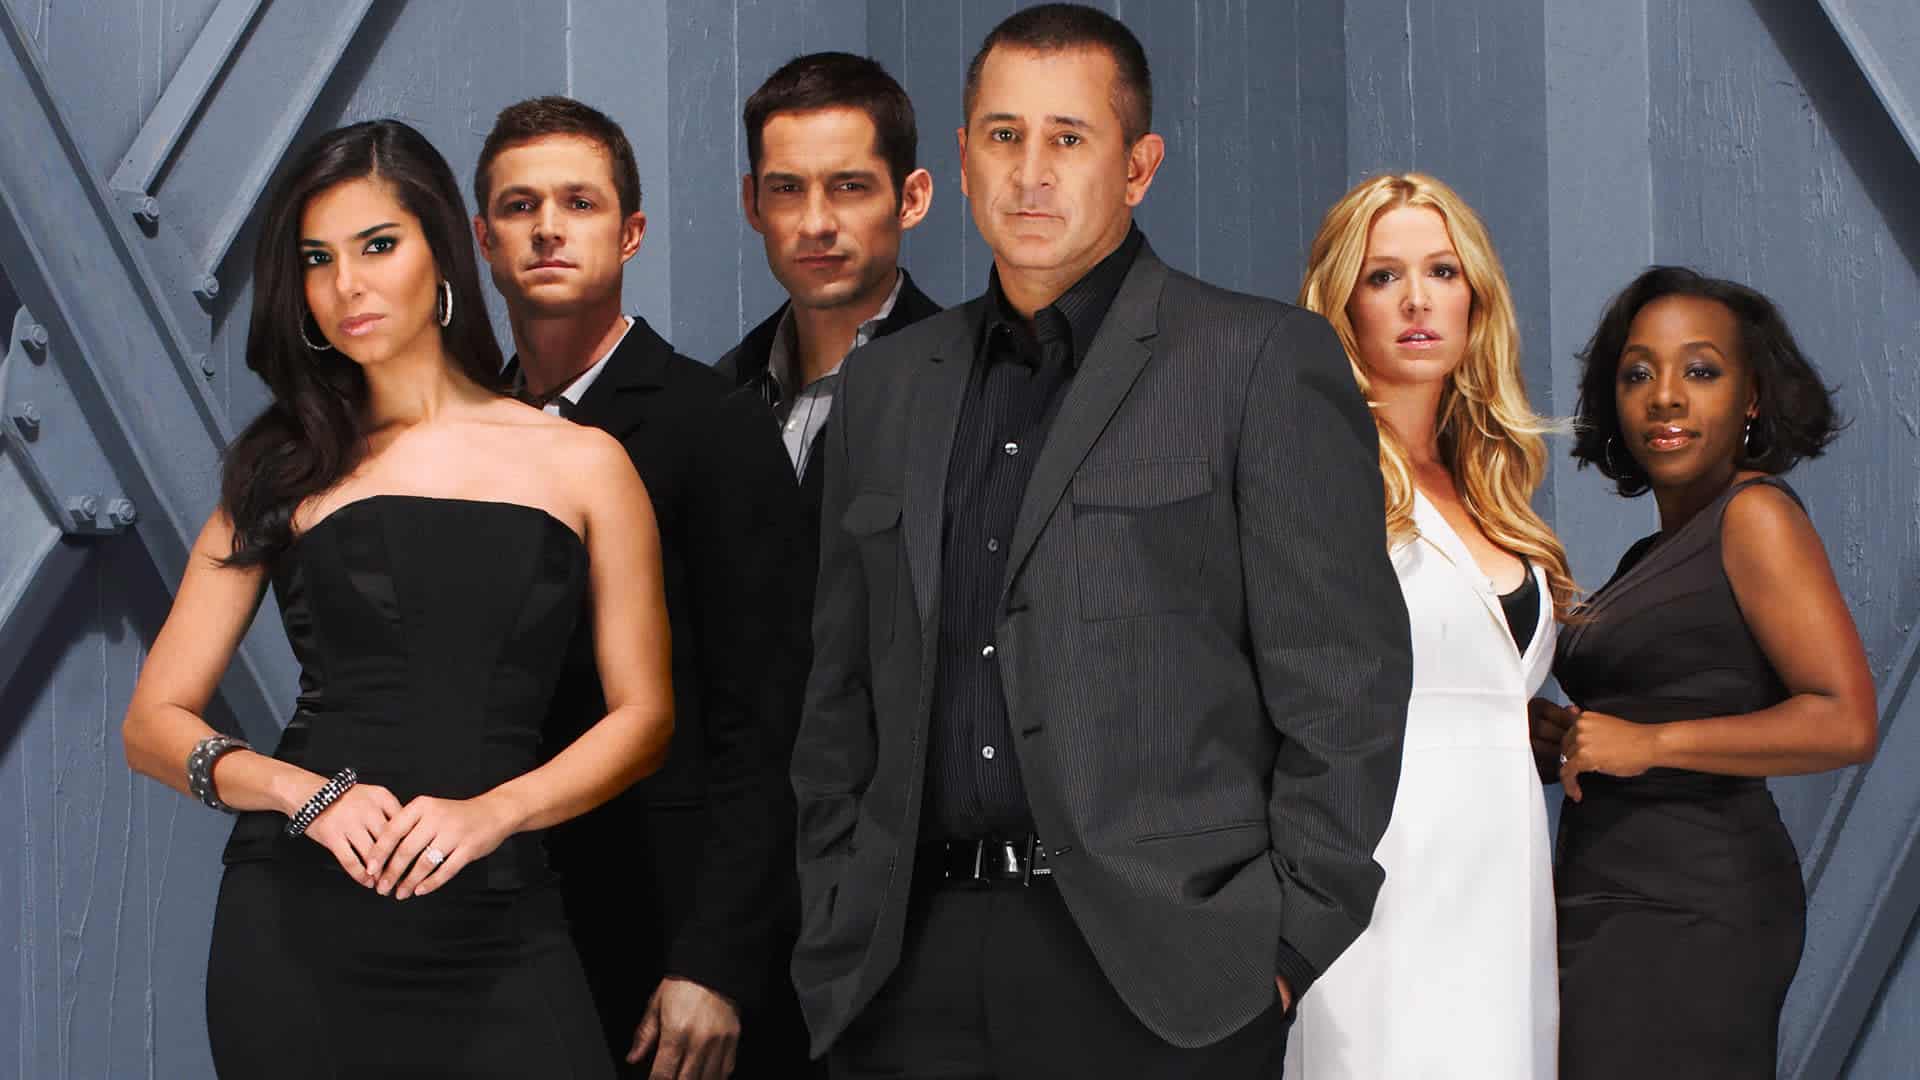 Cast of the show, Without A Trace (Credits: CBS)